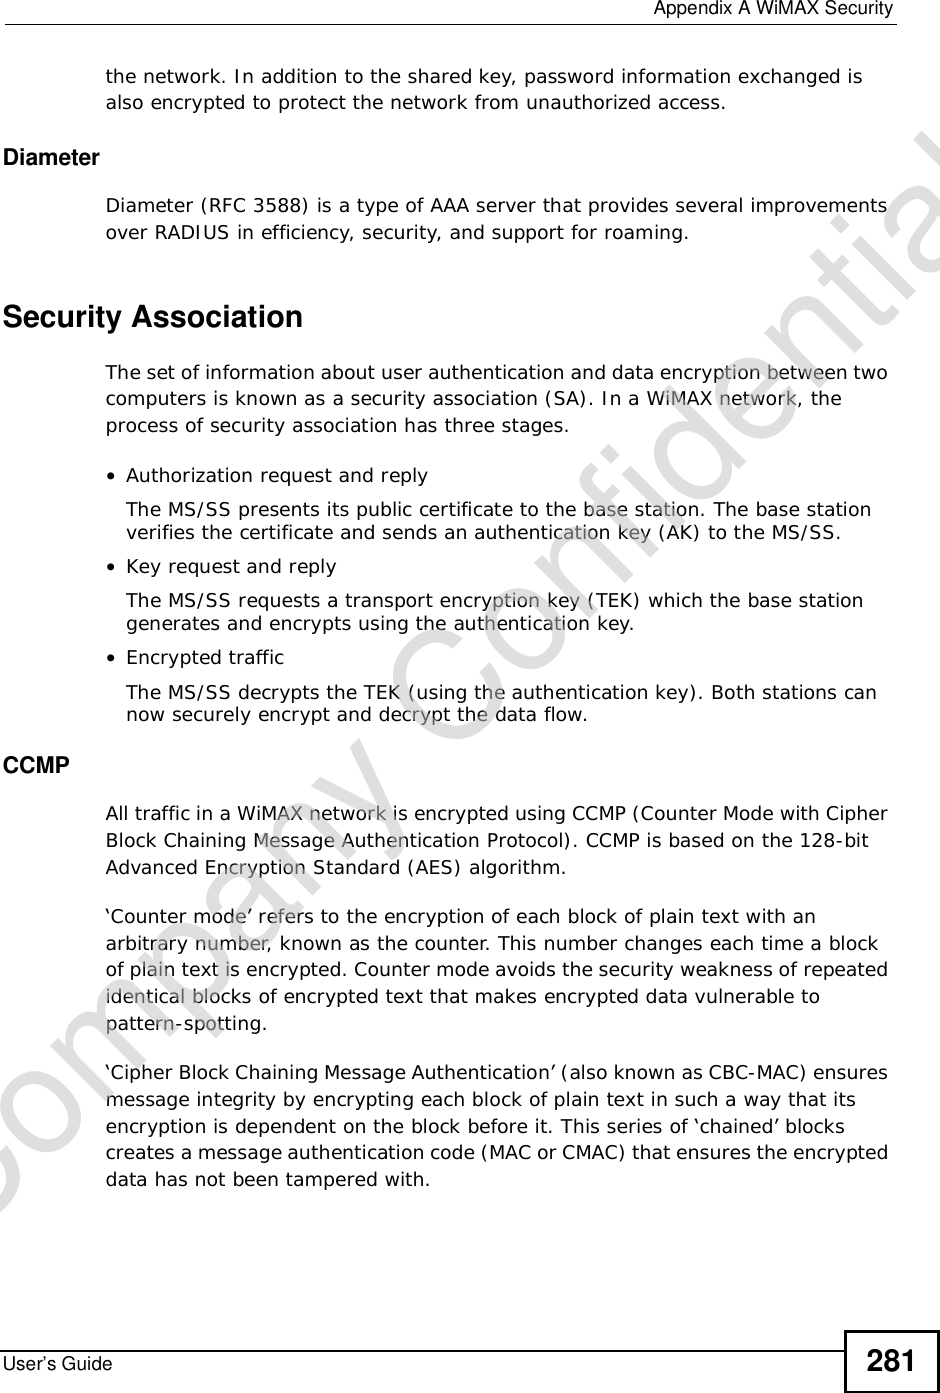  Appendix AWiMAX SecurityUser’s Guide 281the network. In addition to the shared key, password information exchanged is also encrypted to protect the network from unauthorized access. DiameterDiameter (RFC 3588) is a type of AAA server that provides several improvements over RADIUS in efficiency, security, and support for roaming. Security AssociationThe set of information about user authentication and data encryption between two computers is known as a security association (SA). In a WiMAX network, the process of security association has three stages.•Authorization request and replyThe MS/SS presents its public certificate to the base station. The base station verifies the certificate and sends an authentication key (AK) to the MS/SS.•Key request and replyThe MS/SS requests a transport encryption key (TEK) which the base station generates and encrypts using the authentication key. •Encrypted trafficThe MS/SS decrypts the TEK (using the authentication key). Both stations can now securely encrypt and decrypt the data flow.CCMPAll traffic in a WiMAX network is encrypted using CCMP (Counter Mode with Cipher Block Chaining Message Authentication Protocol). CCMP is based on the 128-bit Advanced Encryption Standard (AES) algorithm. ‘Counter mode’ refers to the encryption of each block of plain text with an arbitrary number, known as the counter. This number changes each time a block of plain text is encrypted. Counter mode avoids the security weakness of repeated identical blocks of encrypted text that makes encrypted data vulnerable to pattern-spotting.‘Cipher Block Chaining Message Authentication’ (also known as CBC-MAC) ensures message integrity by encrypting each block of plain text in such a way that its encryption is dependent on the block before it. This series of ‘chained’ blocks creates a message authentication code (MAC or CMAC) that ensures the encrypted data has not been tampered with.Company Confidential